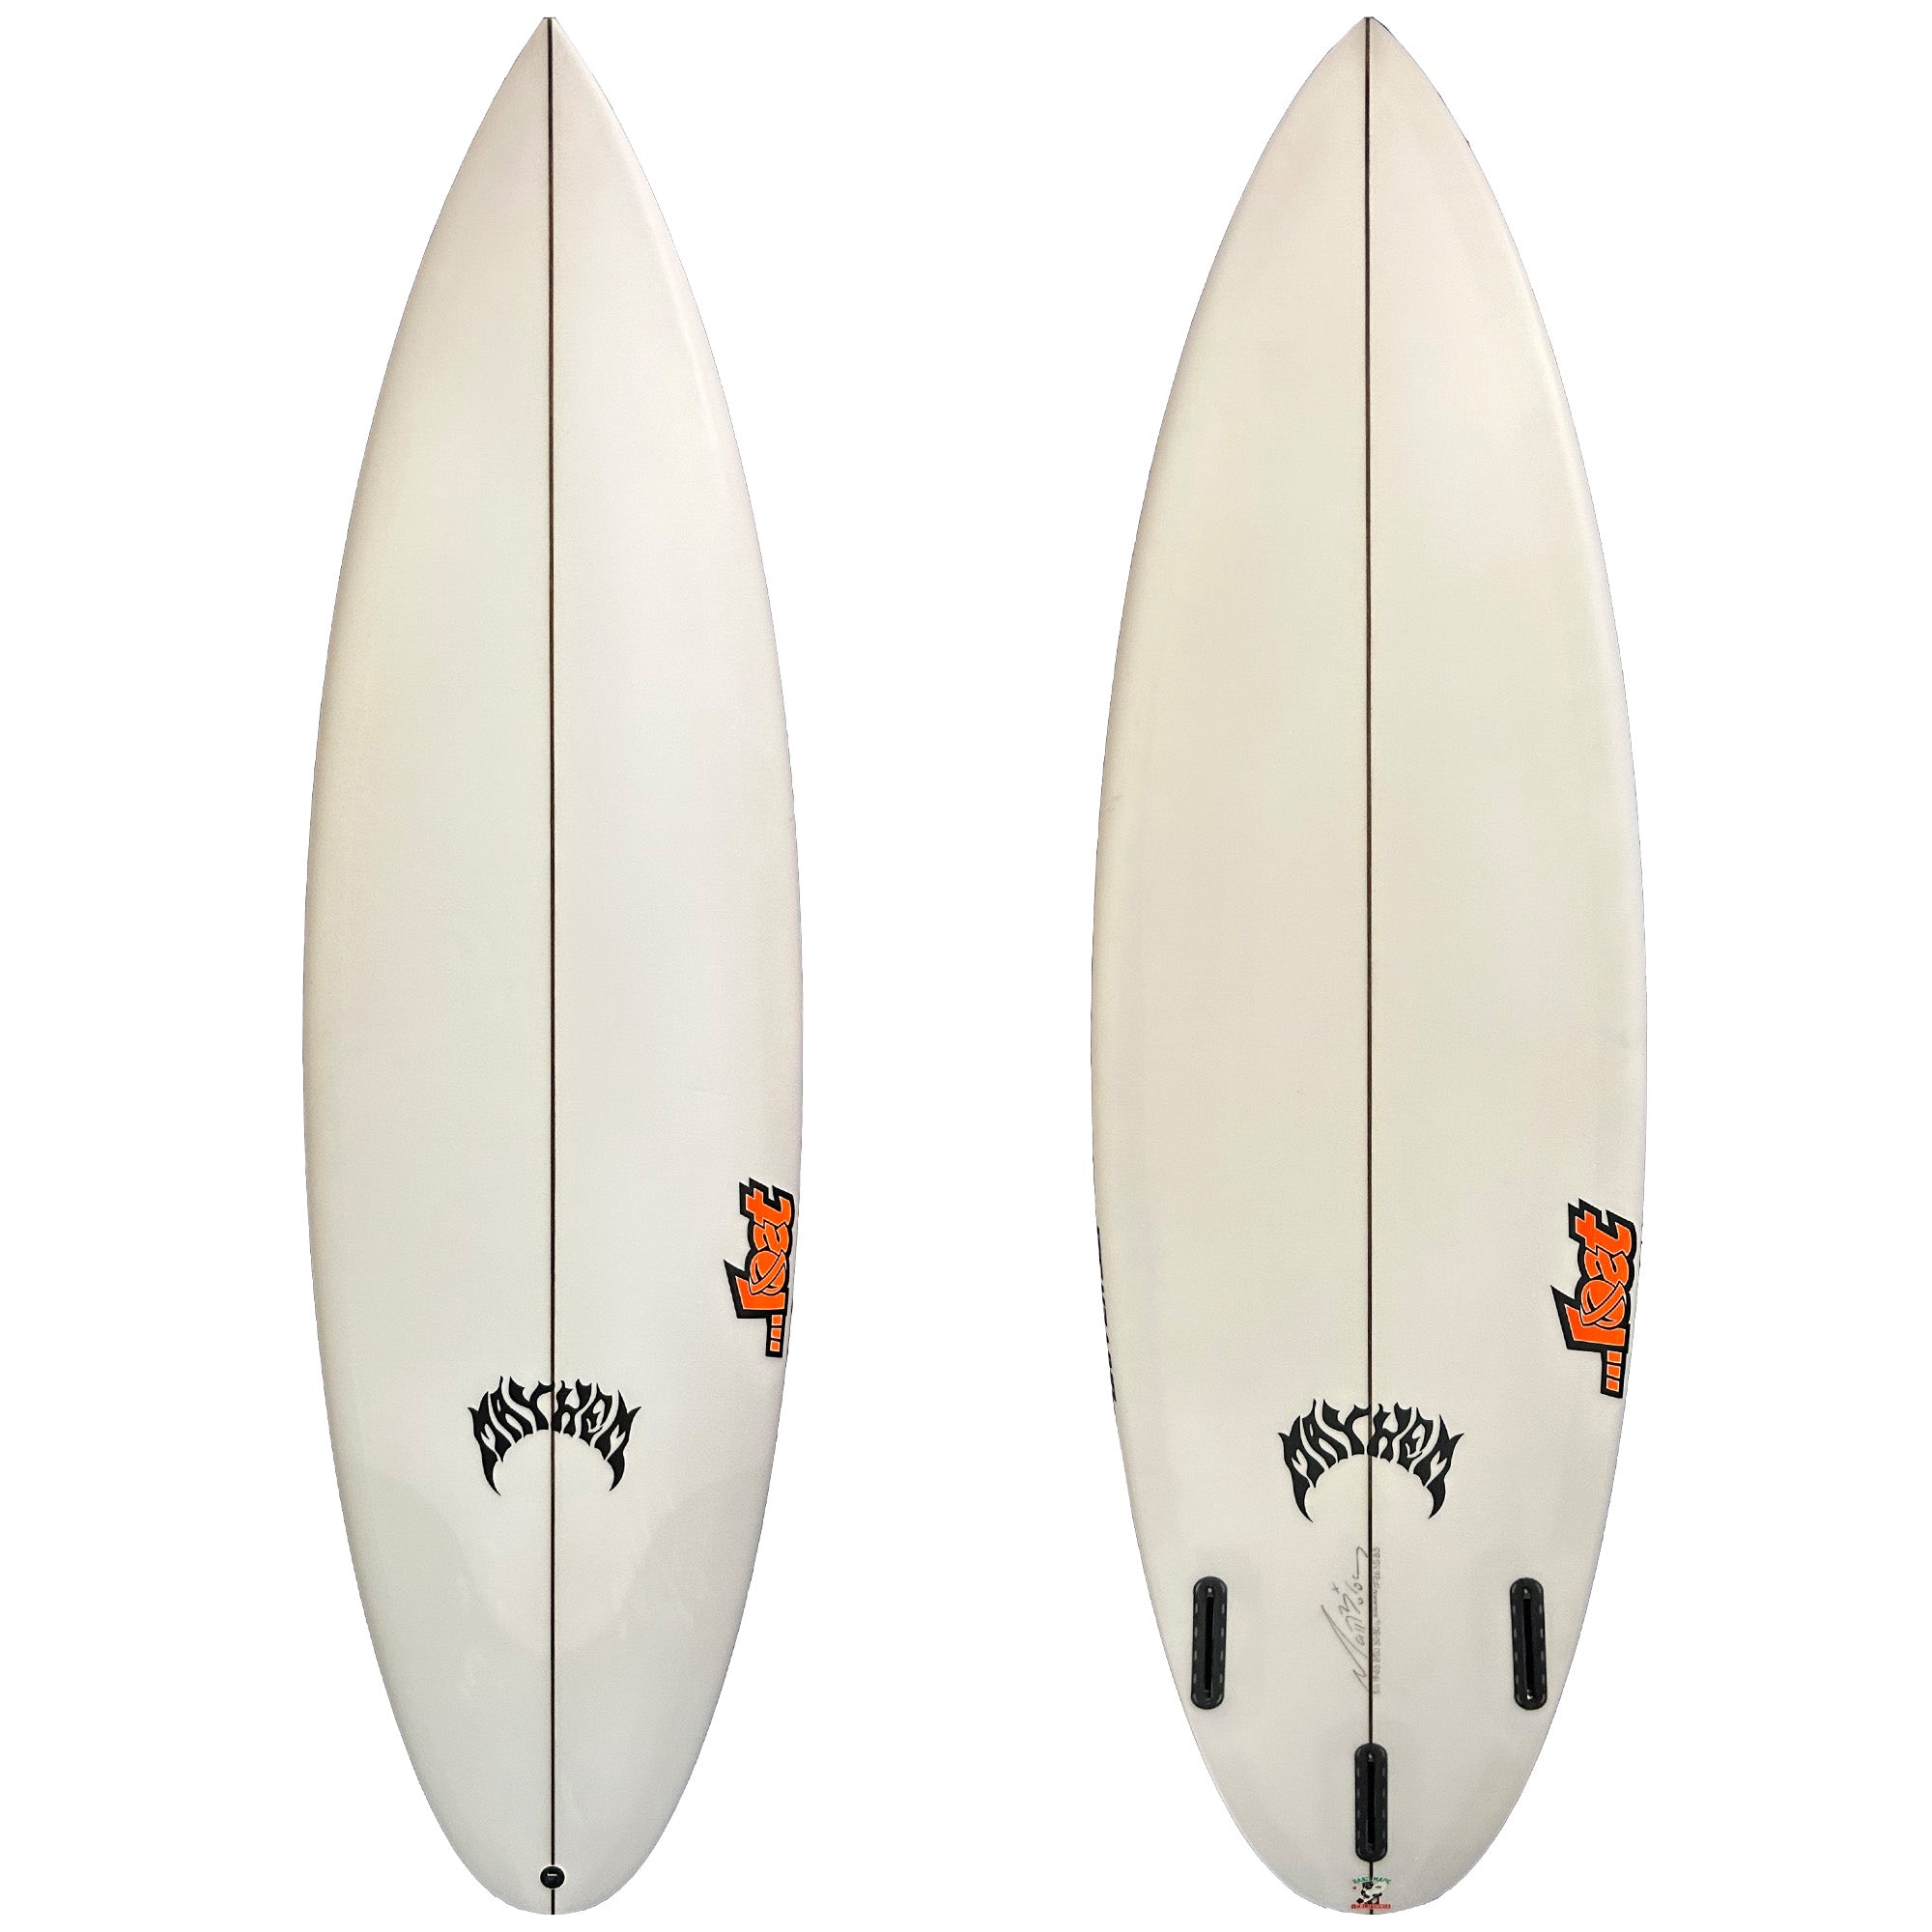 Lost Driver 3.0 5'11 Consignment Surfboard